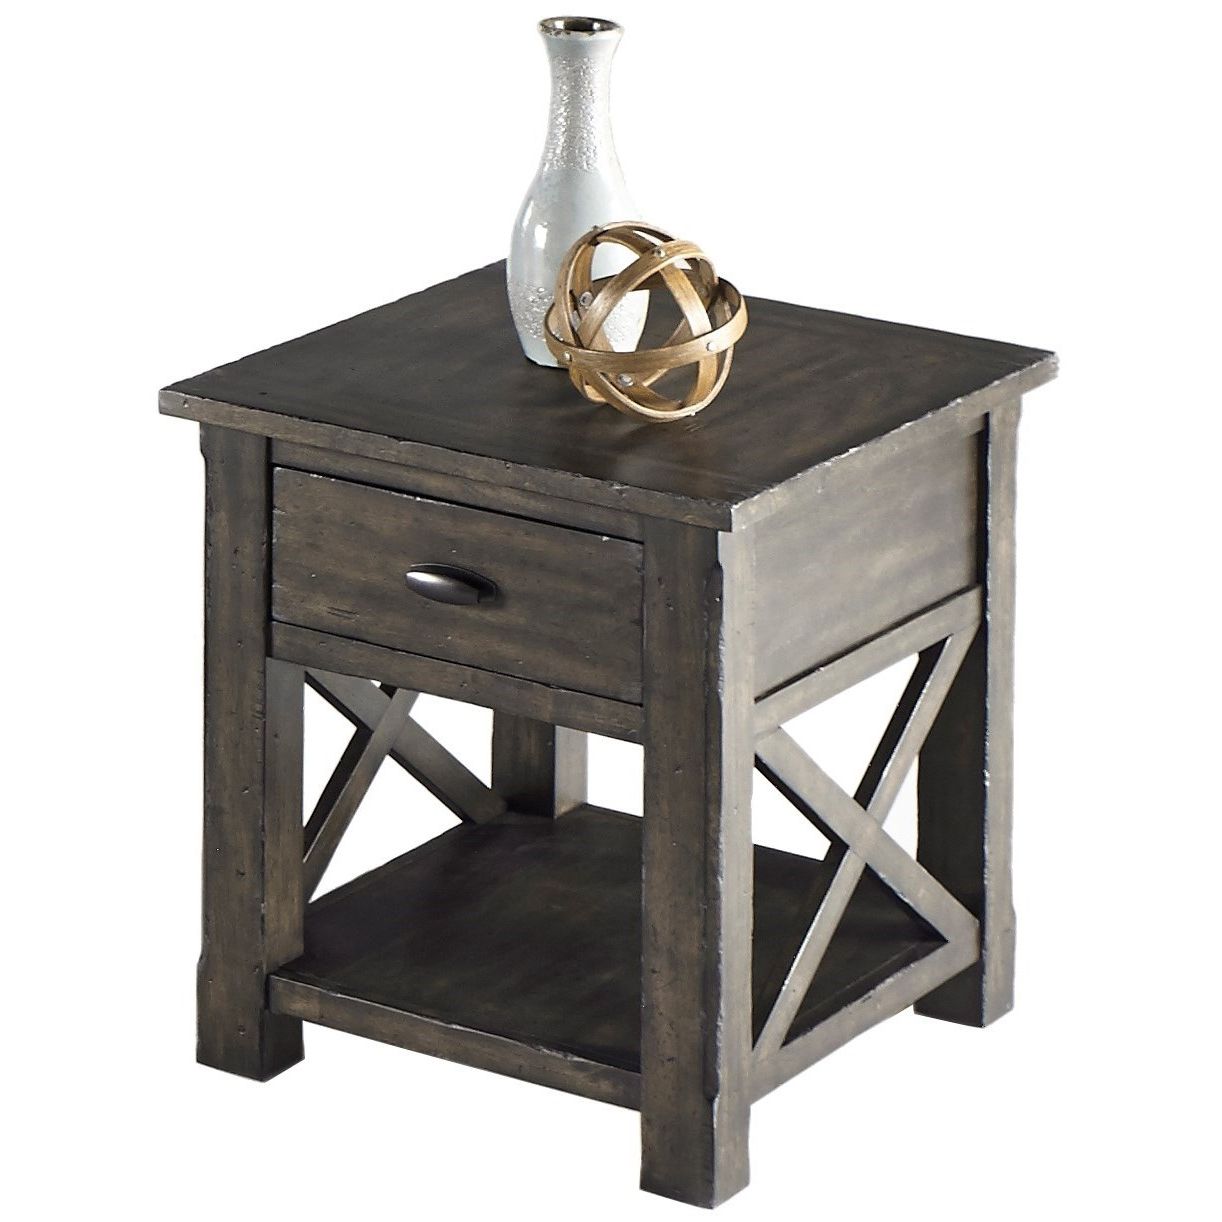 Progressive Furniture Crossroads Rustic Rectangular End Table In Gray Inside Rustic Gray End Tables (View 7 of 20)